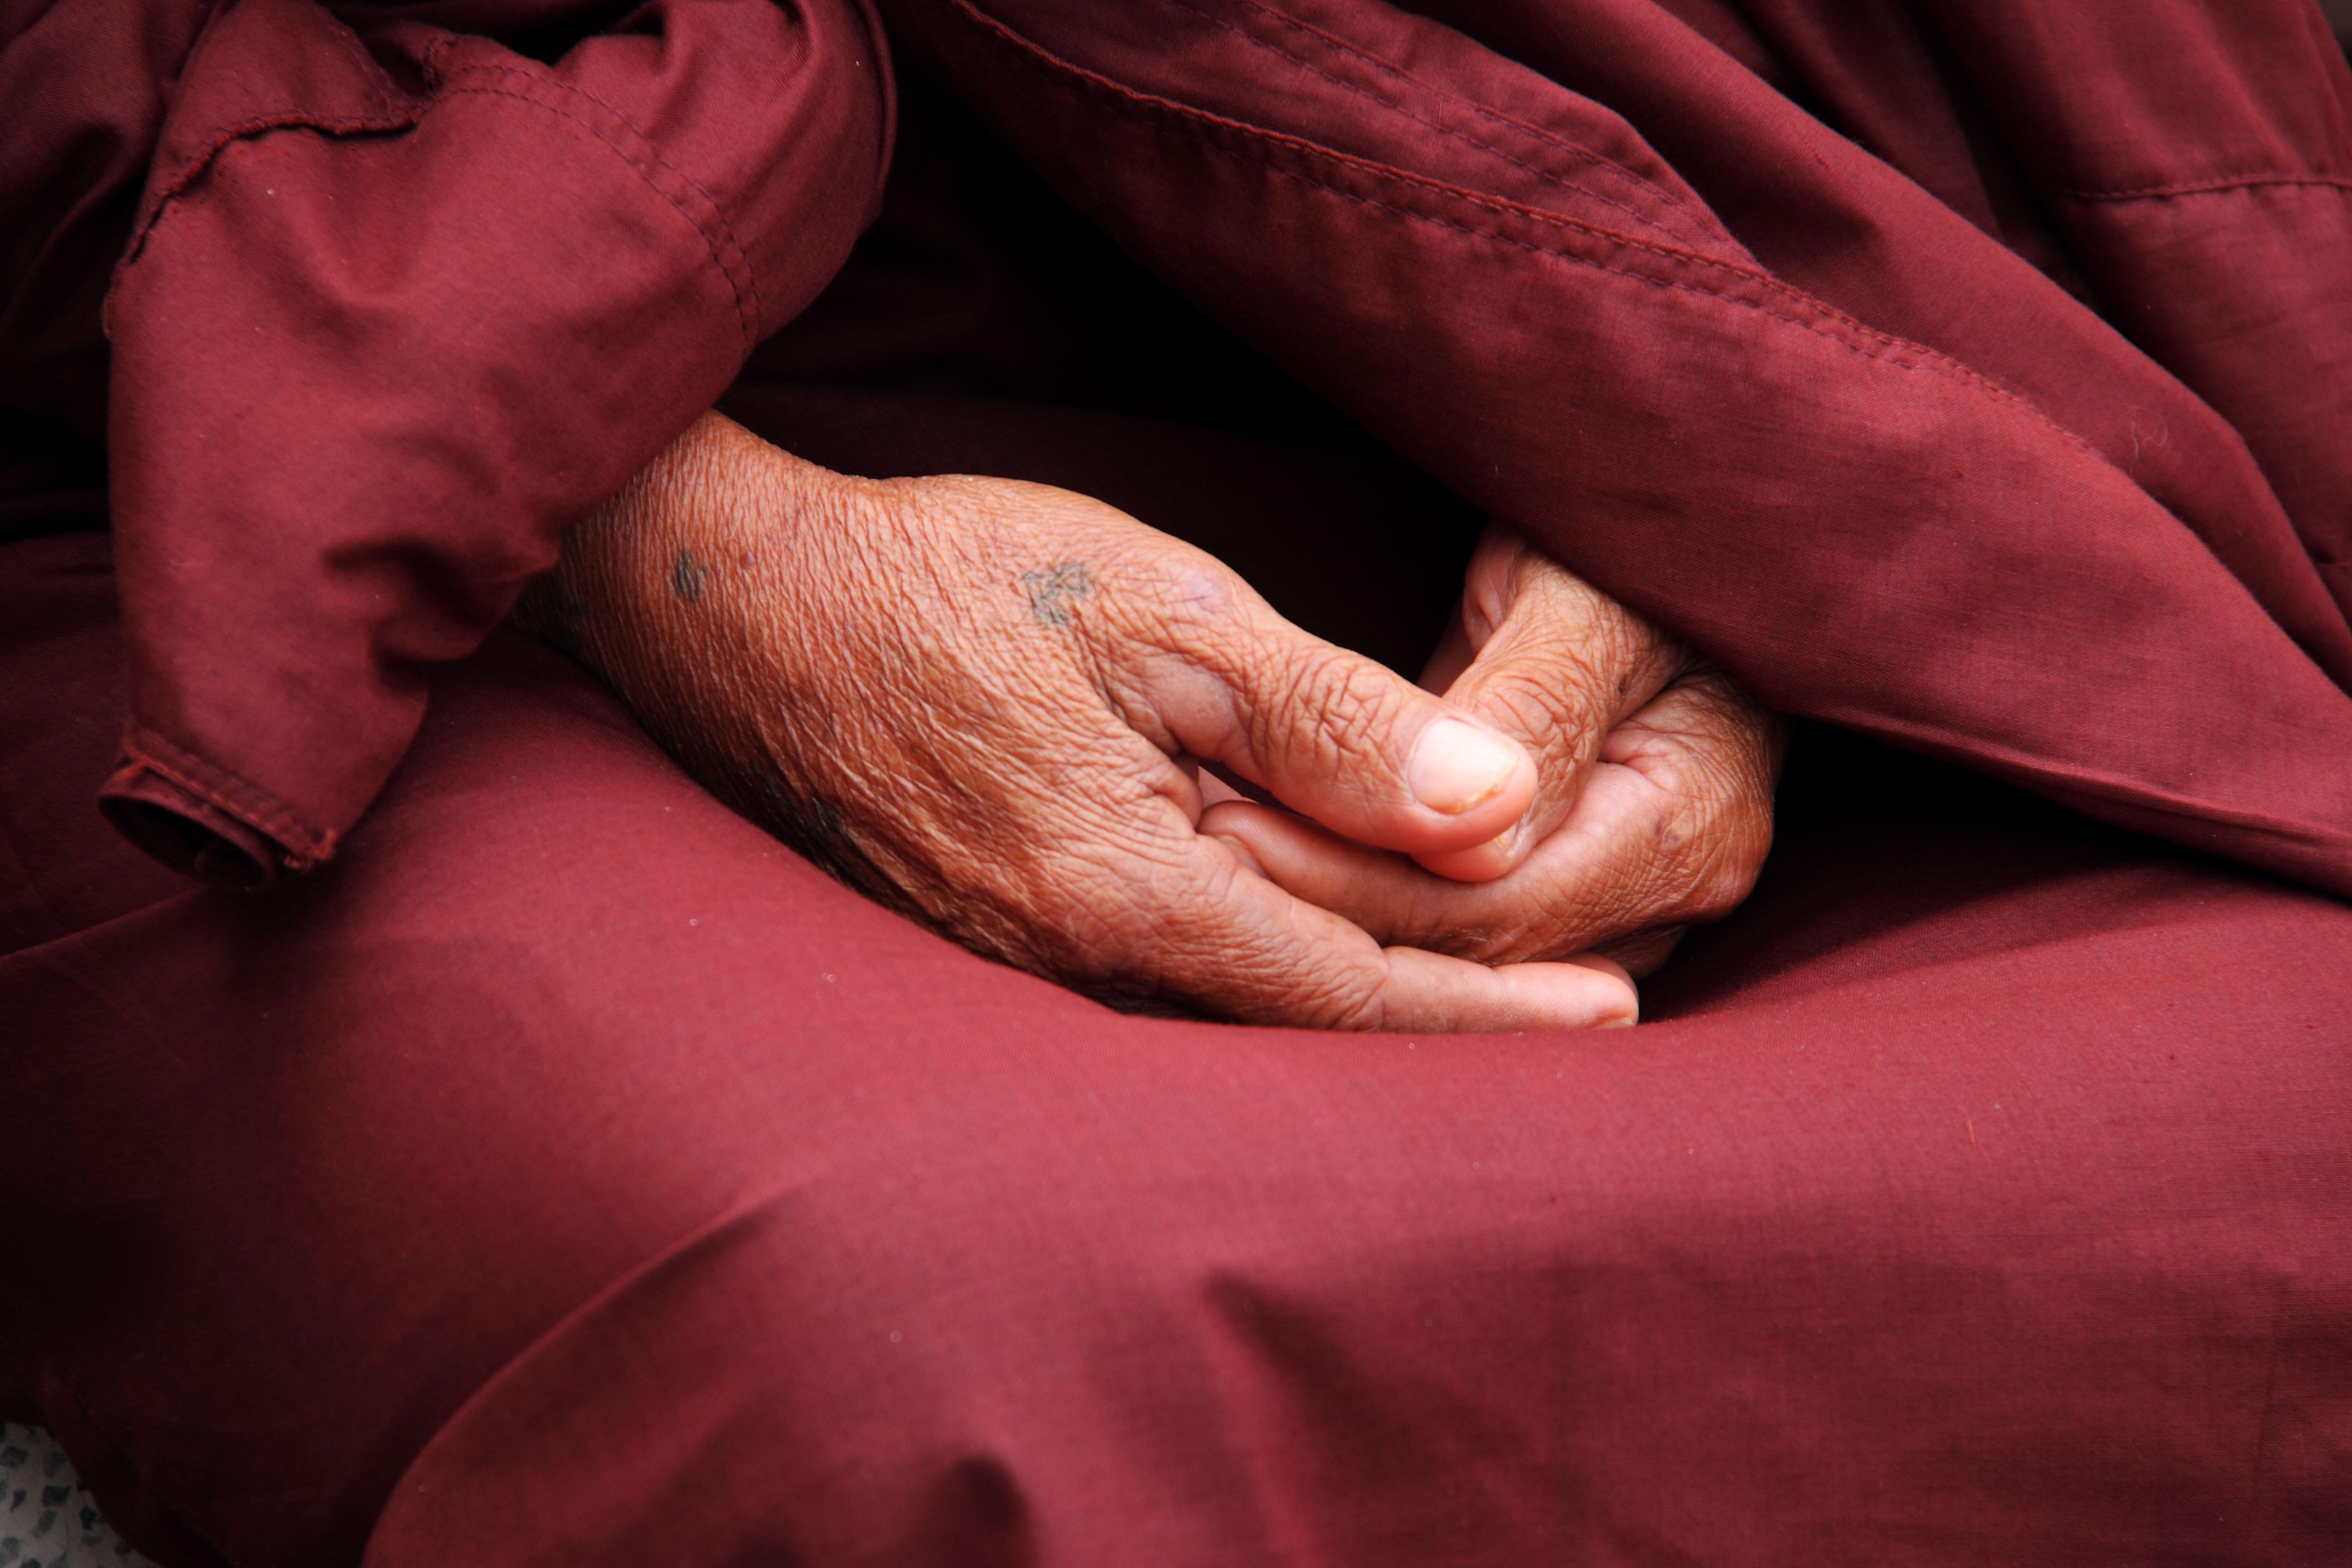 Hands folded together setting on red robe.